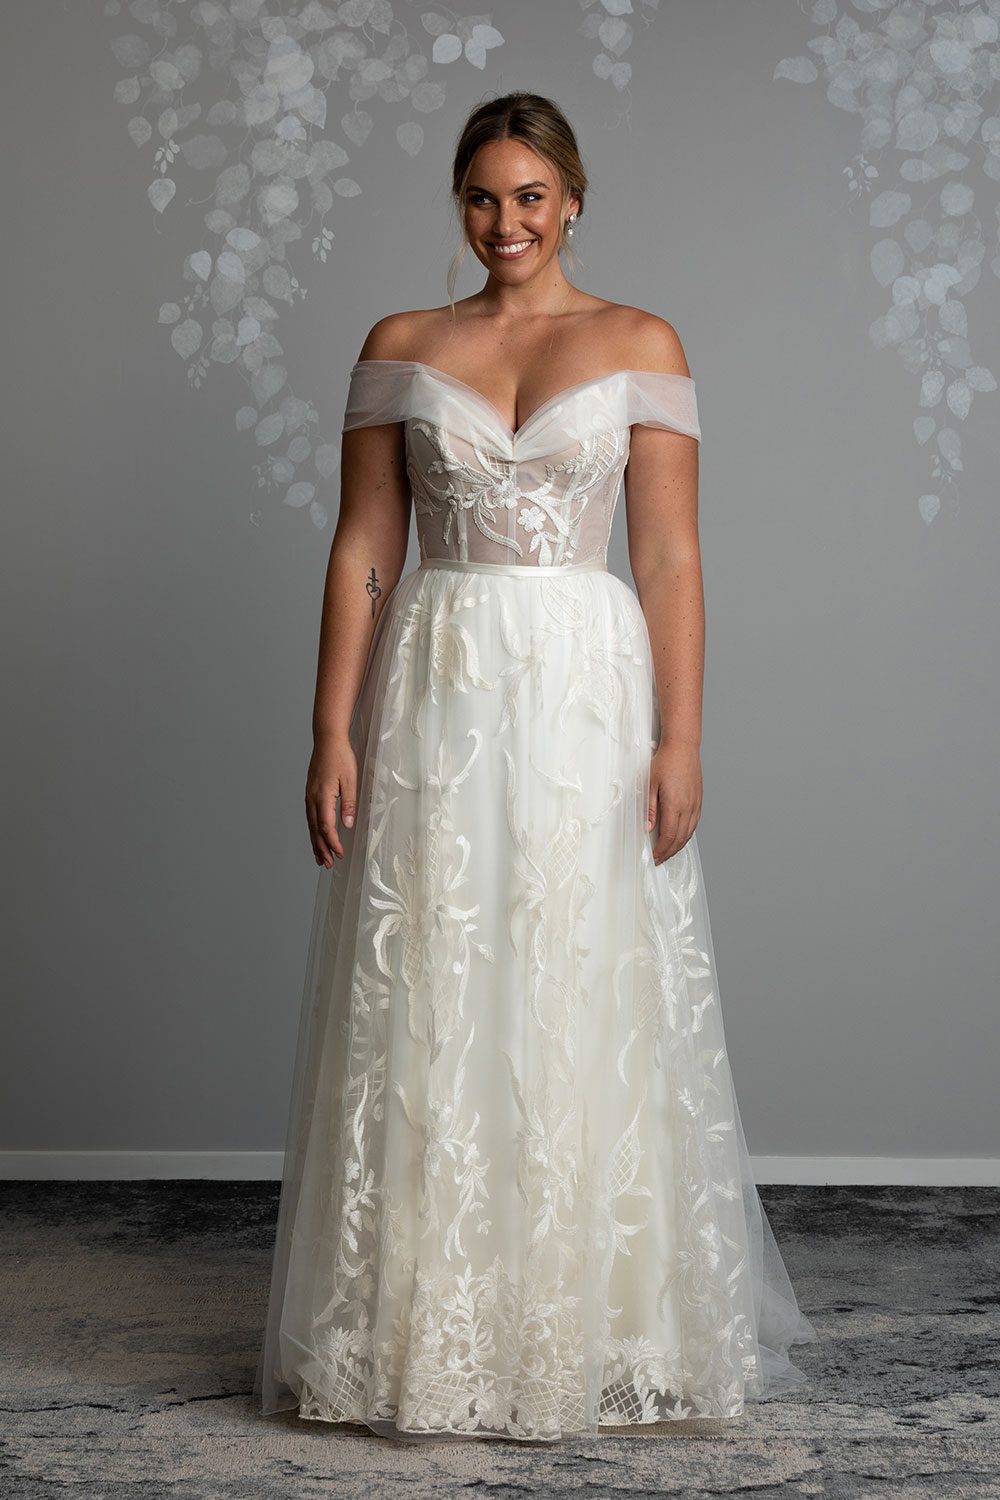 Zoe wedding dress by Vinka Design - a romantic & dreamy off-shoulder gown with a structured, boned bodice, a full lace & tulle skirt. Semi-sheer bodice with tulle off-shoulder detailing and satin belt. Model wearing off-shoulder gown with boned bodice and full lace and tulle skirt